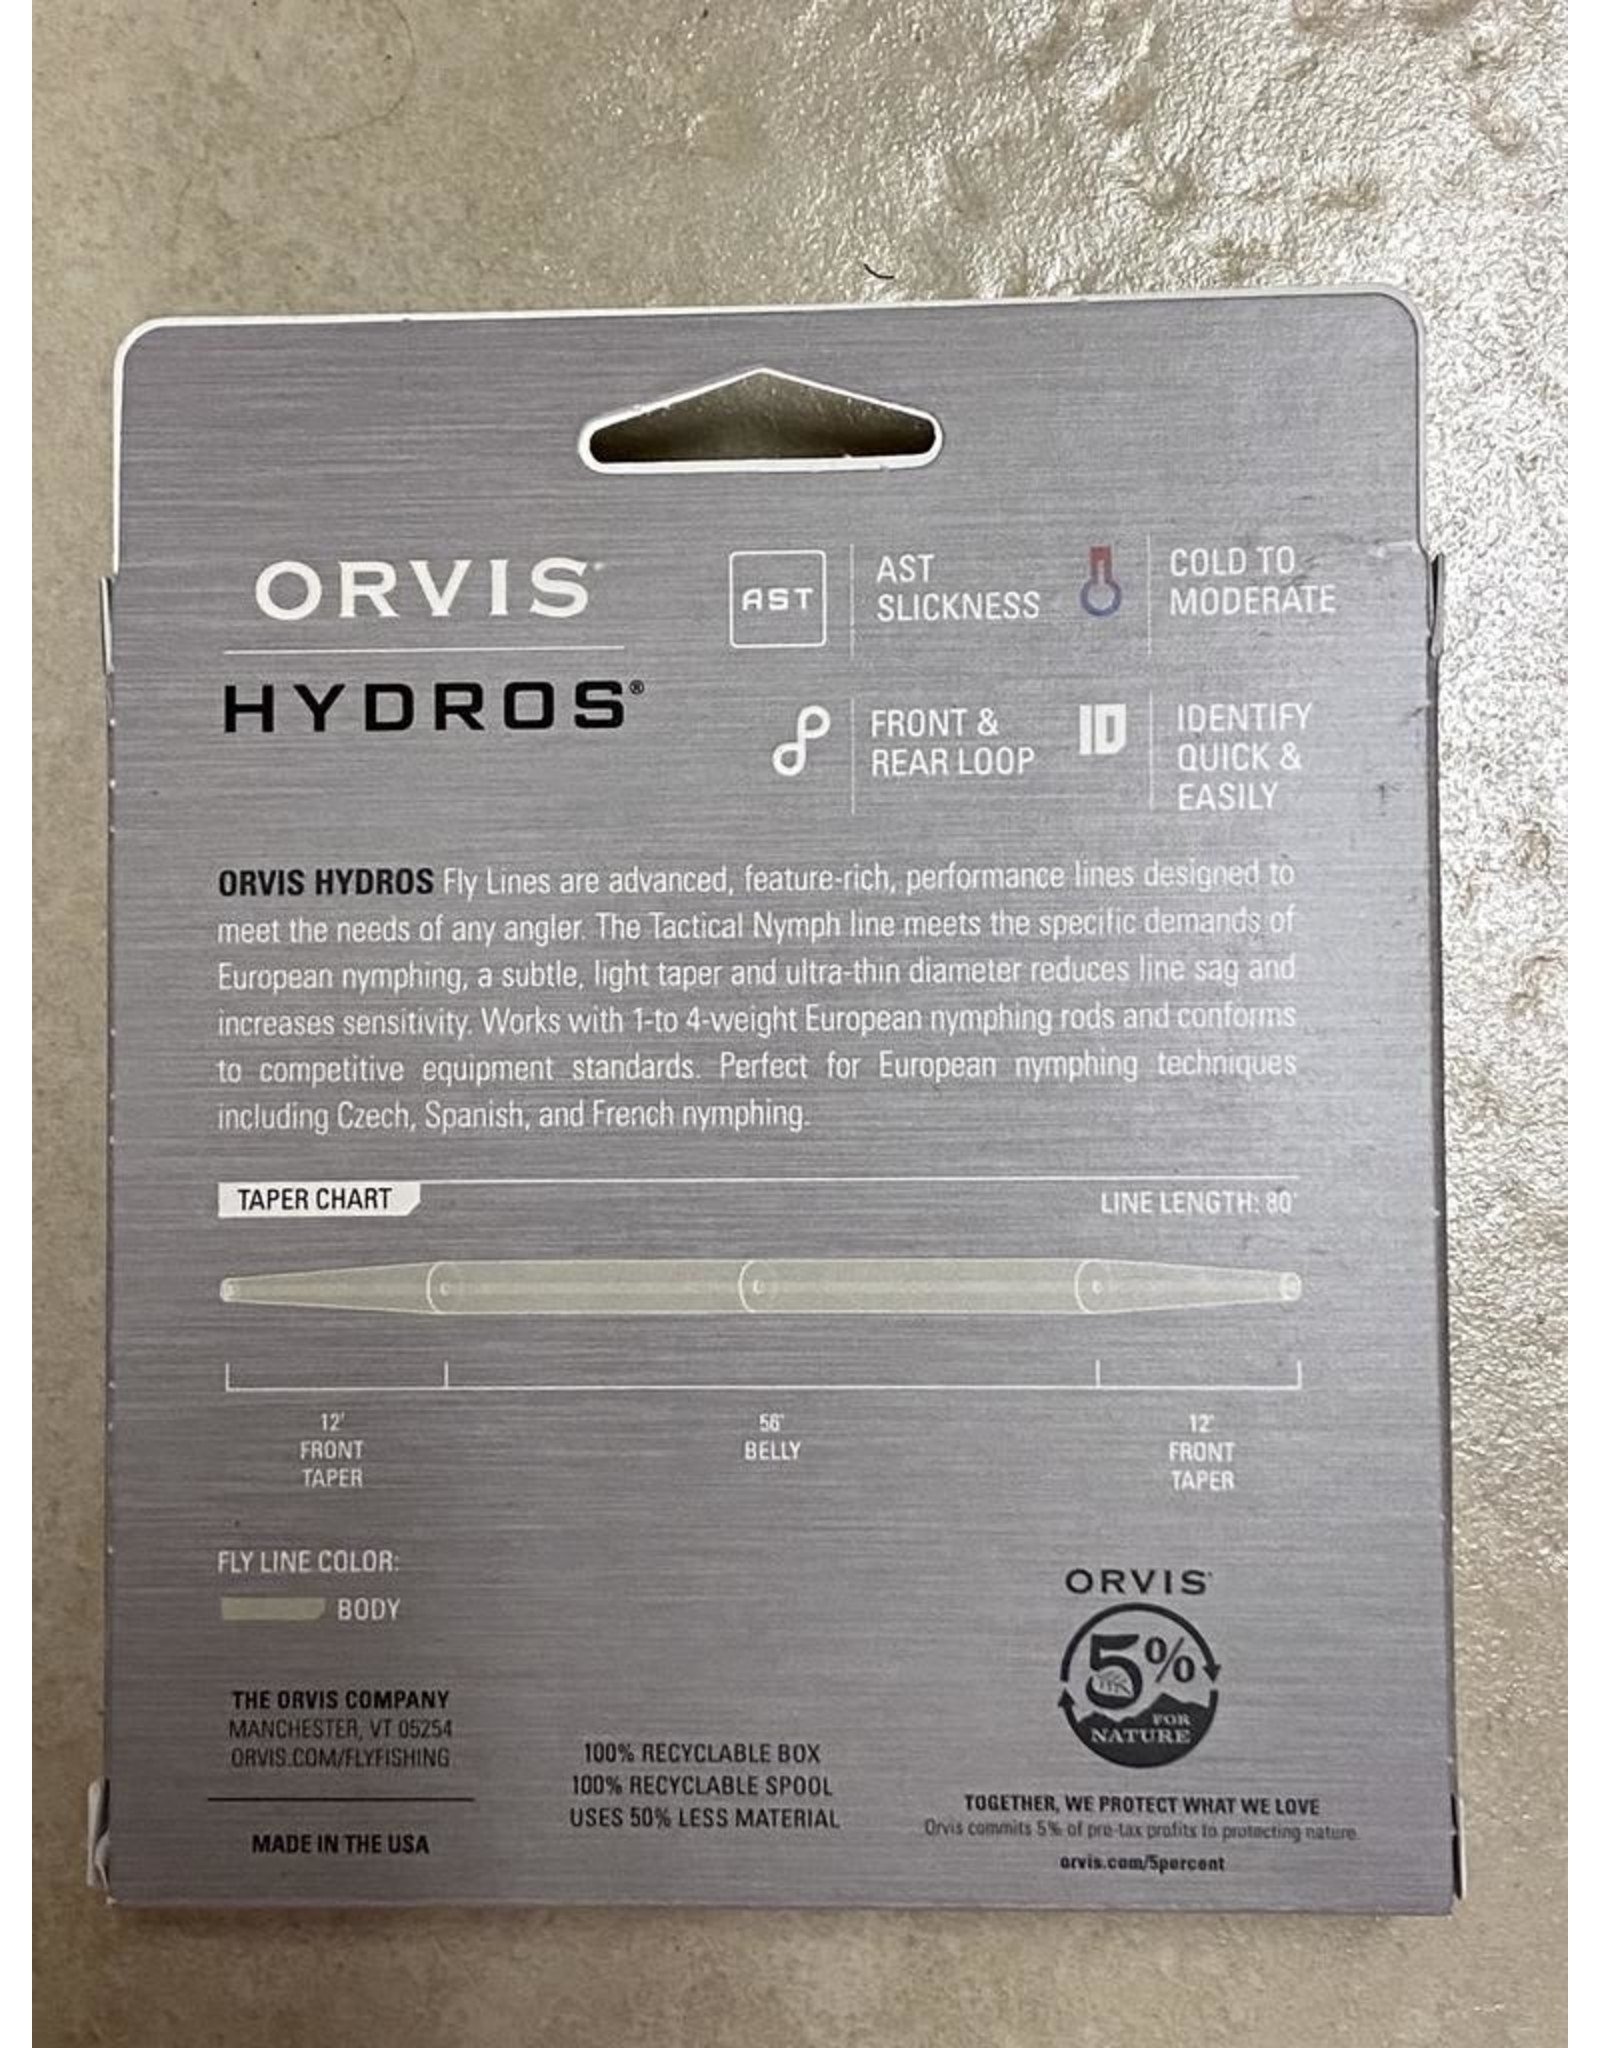 Orvis NEW ORVIS Hydros Tactical Nymphing Line (DT-1)